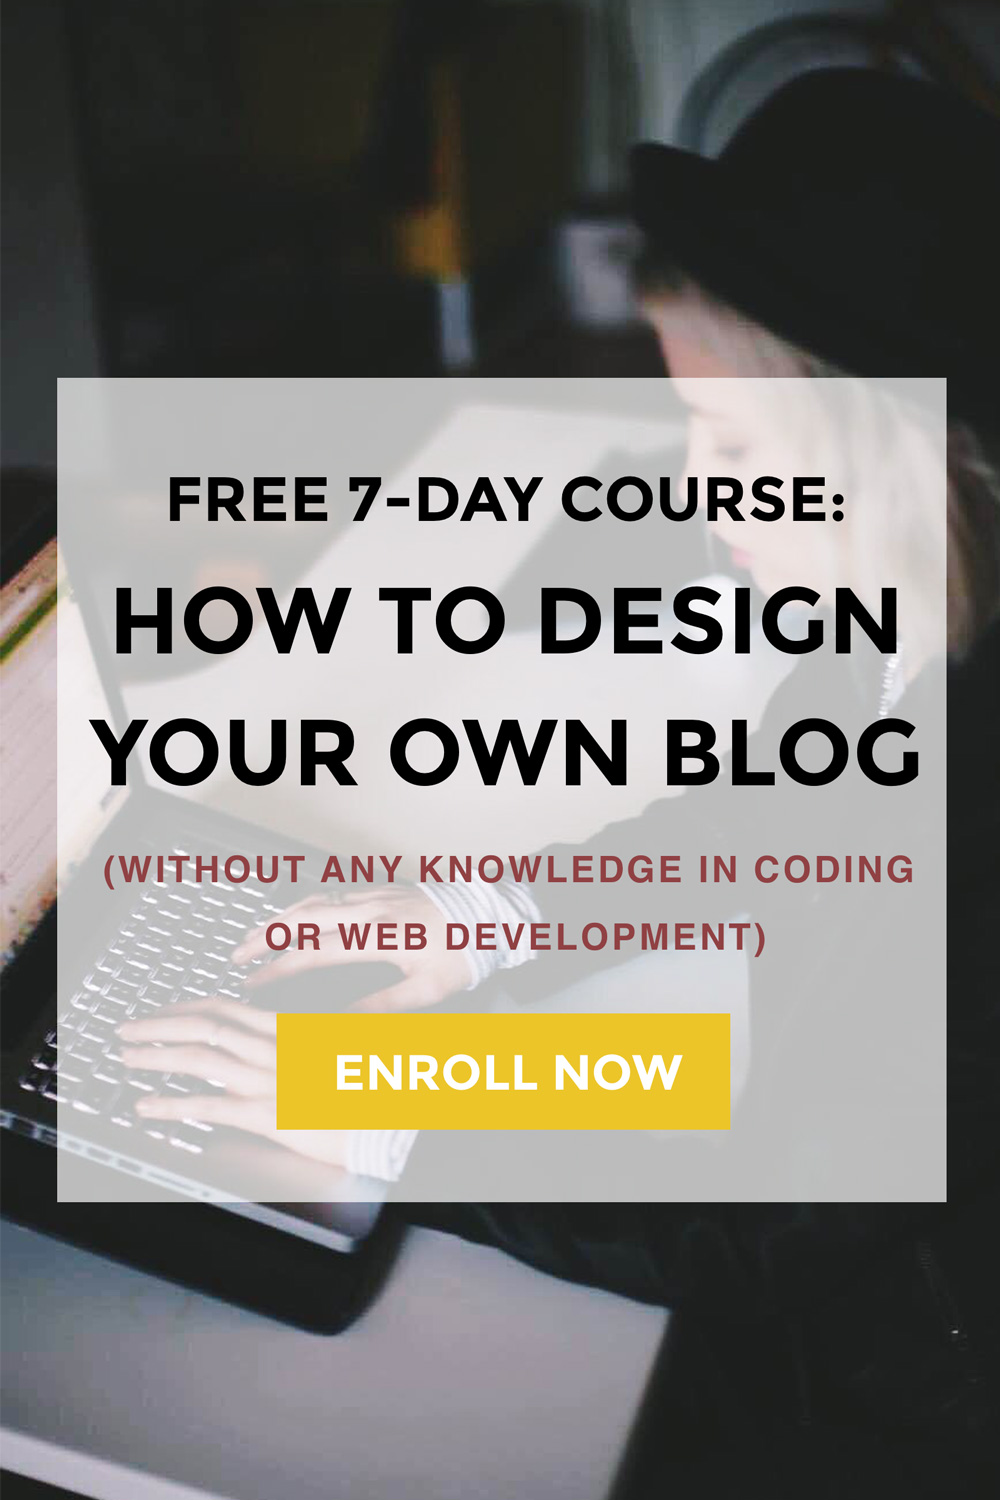 Get My Free 5-day Course: Design Your Own Blog! - Kotryna Bass